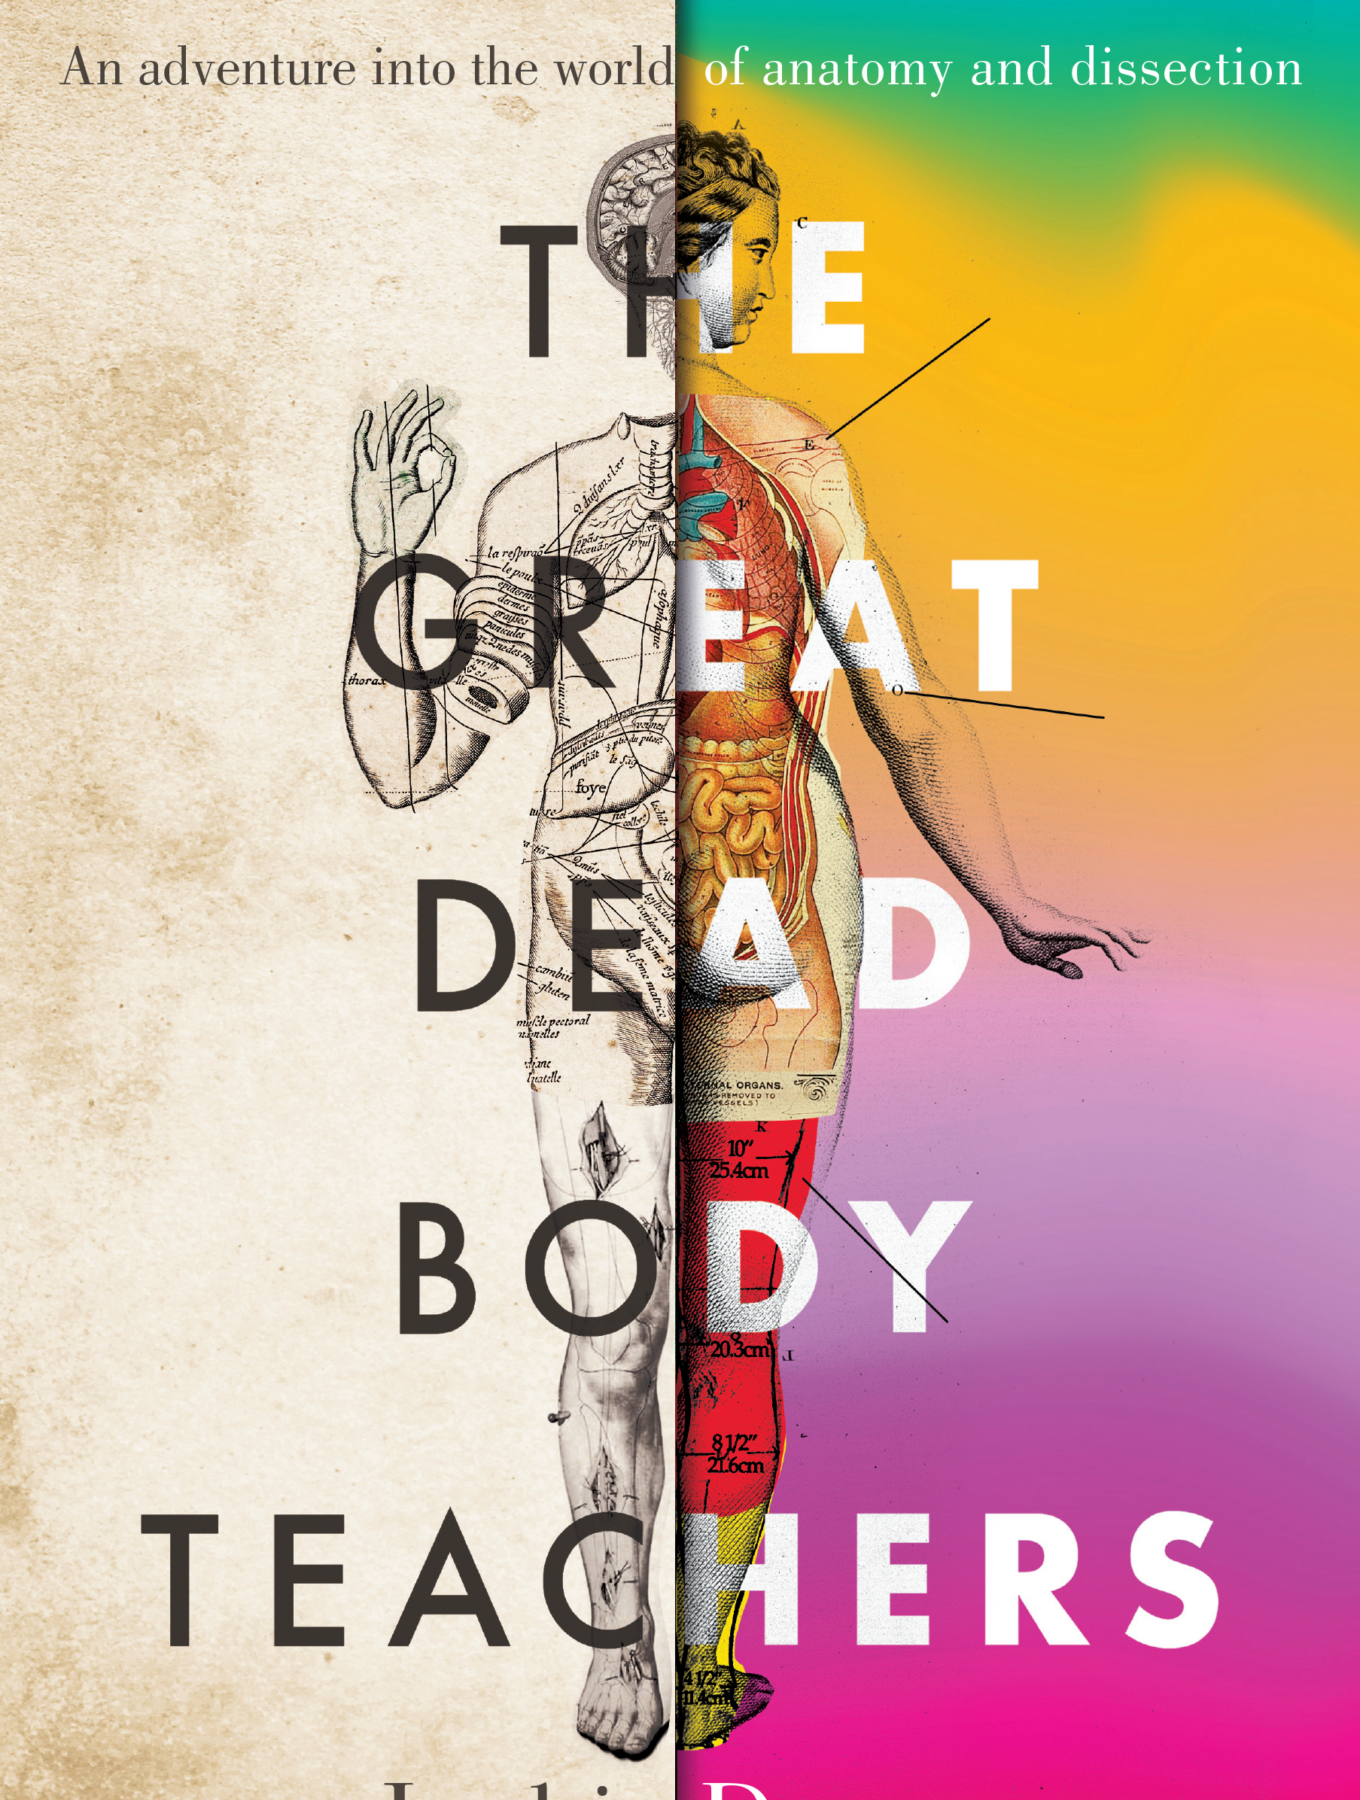 A book cover split into two halves lengthwise, the left is beige and has black textbook-like illustrations of a body; the right half of the body contains colour including organs and is against a pink, purple, yellow and green background. The title is in block lettering in black and white, across five lines to cover the full height of the page